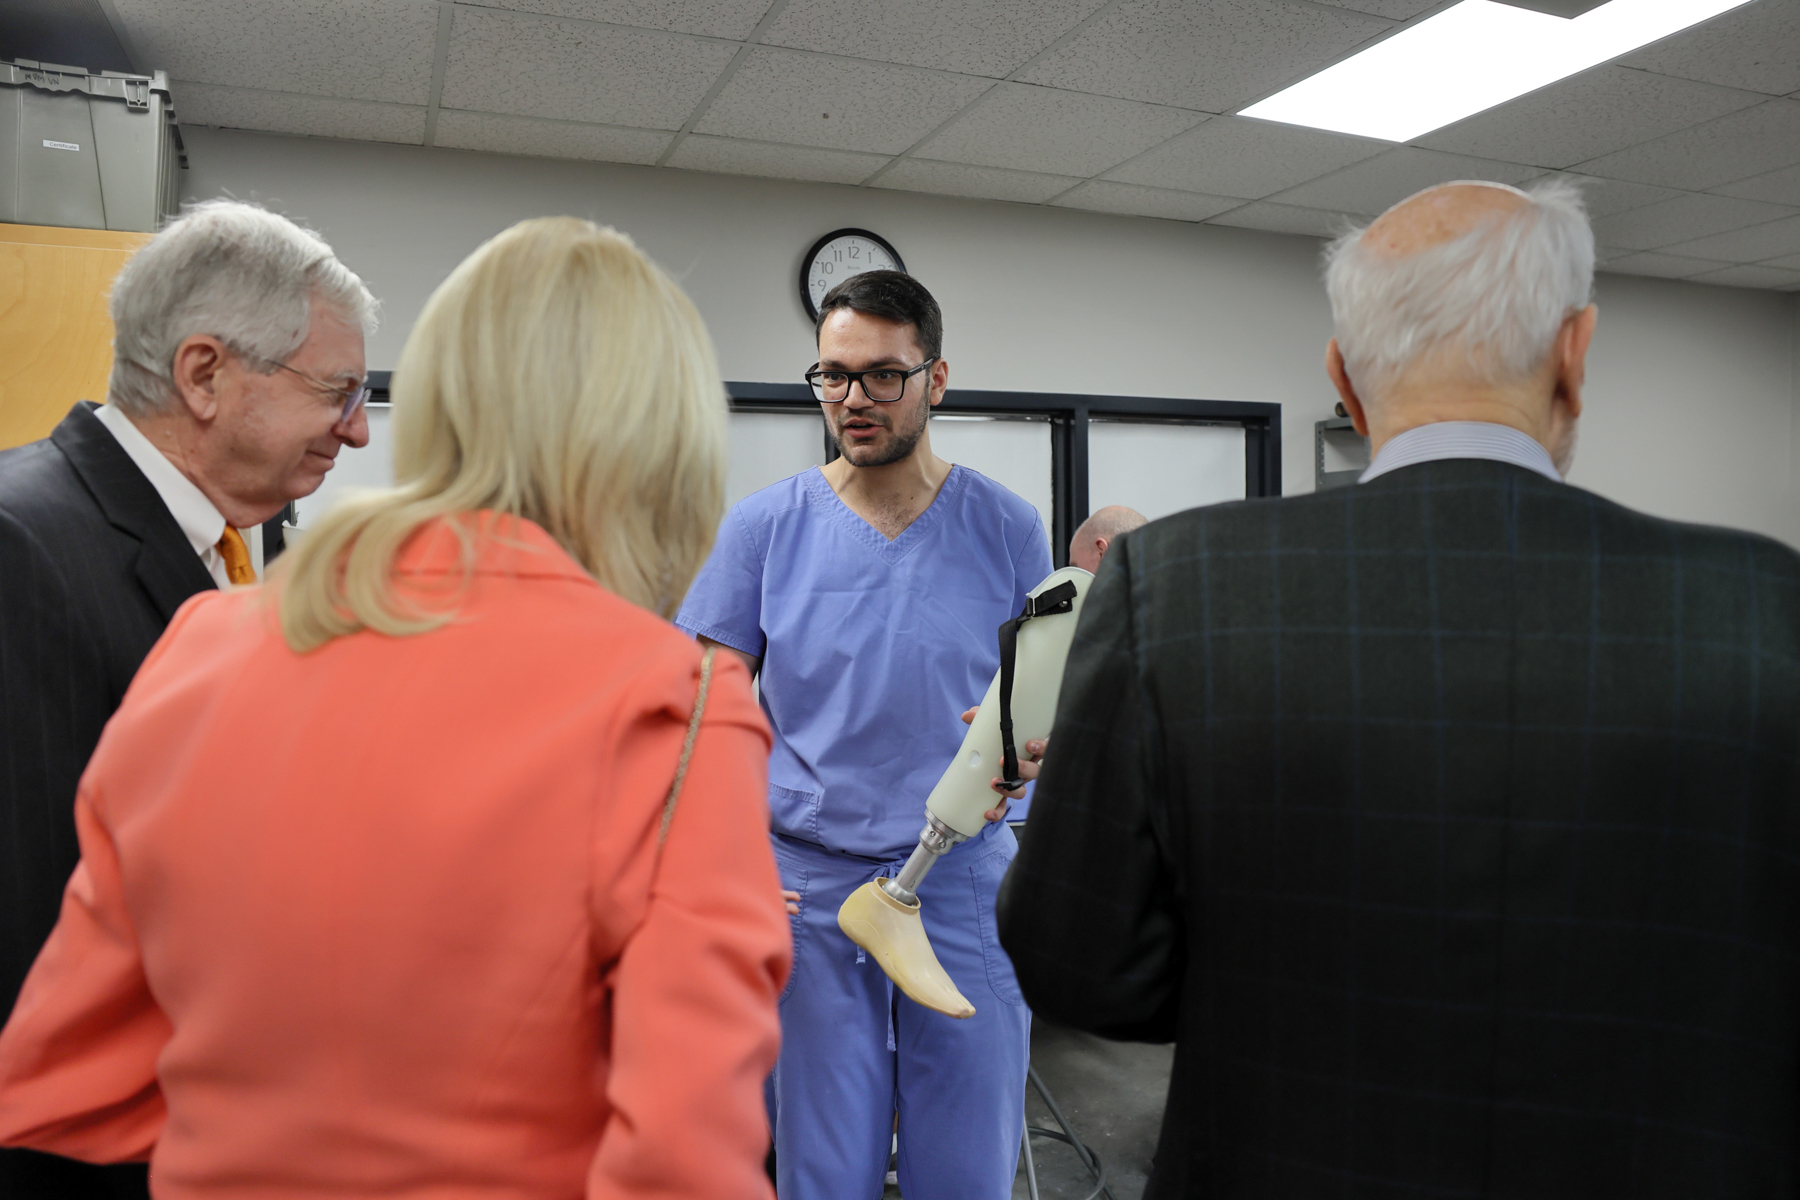 A man in scrubs shows a prosthetic leg to three people wearing suits